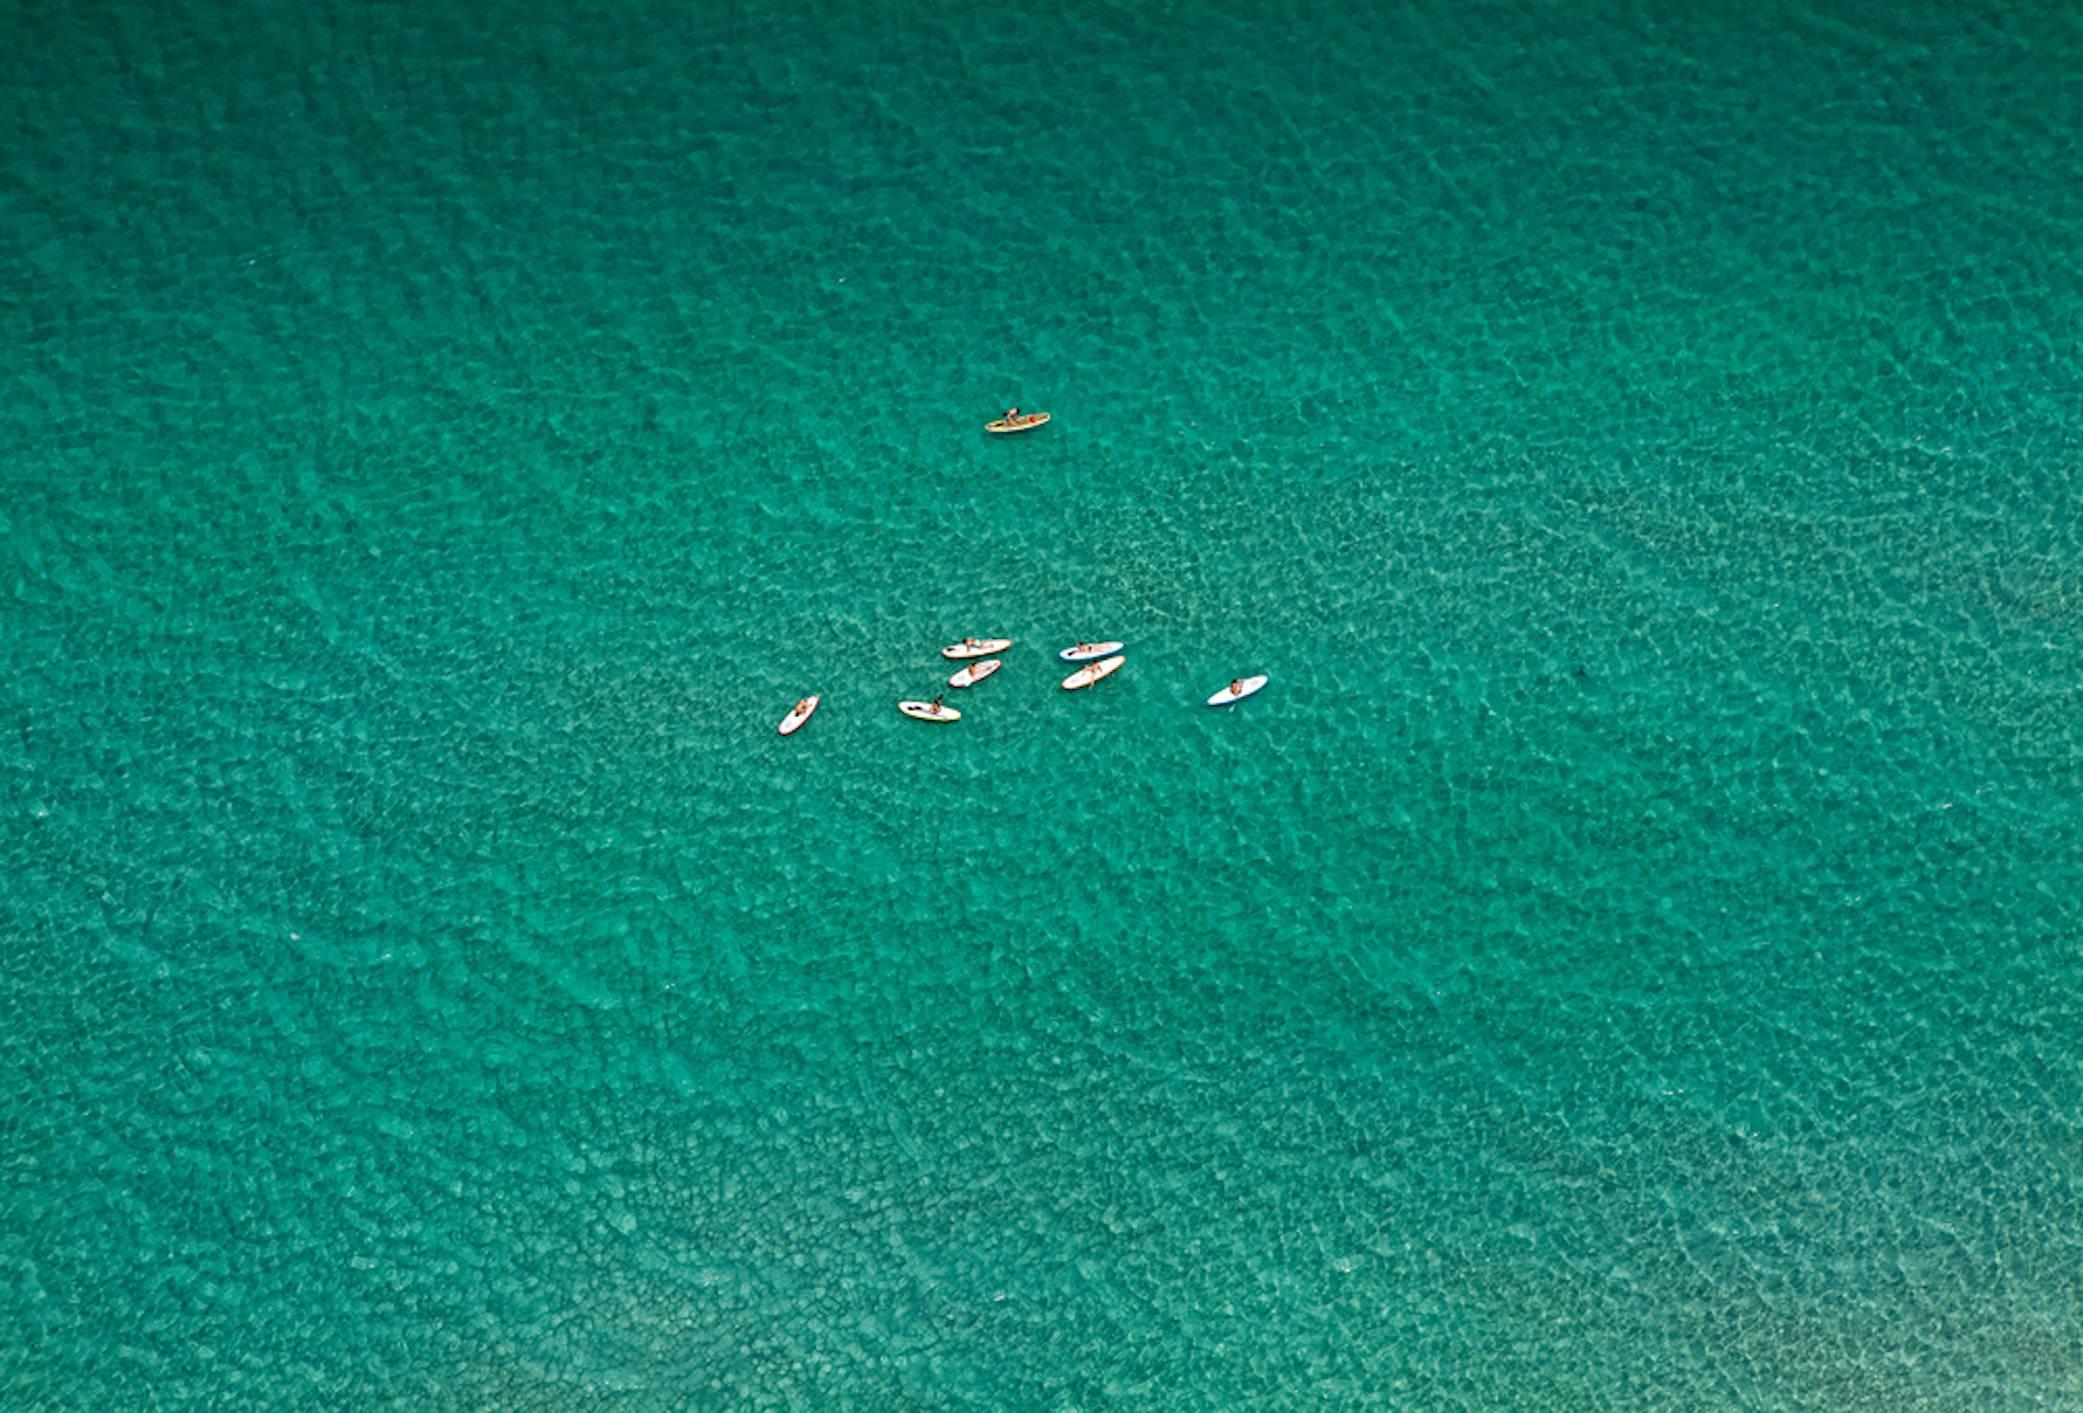 Paddle Boarders. Areal Landscape ocean limited edition color photograph